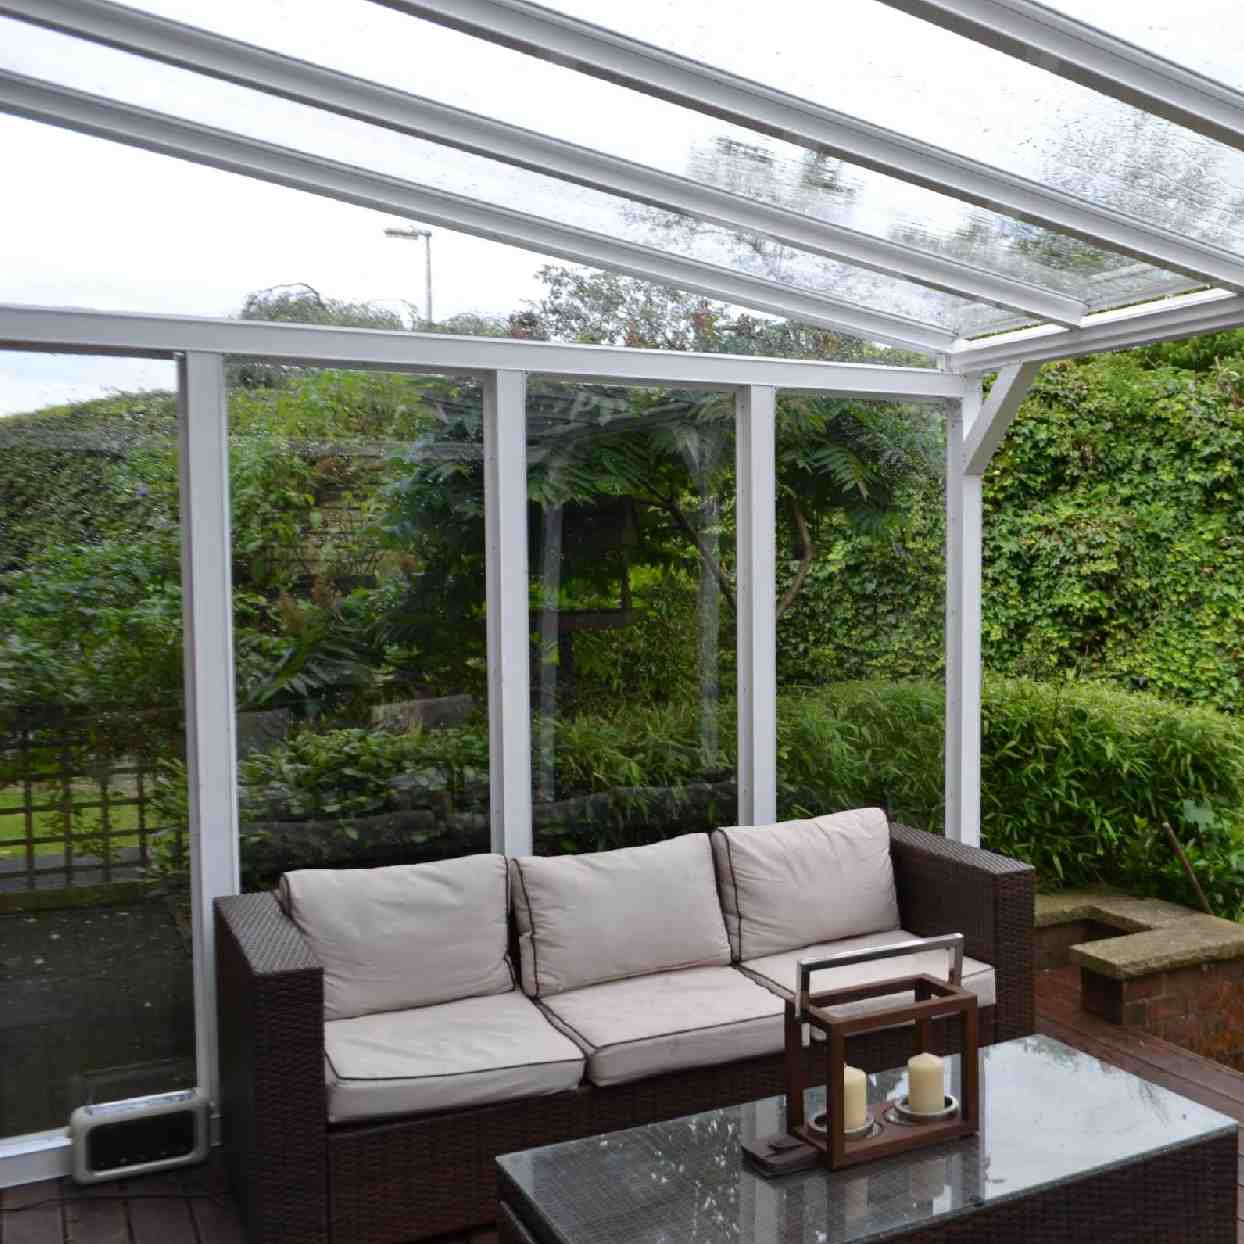 Buy Omega Verandah White with 16mm Polycarbonate Glazing - 7.4m (W) x 3.0m (P), (4) Supporting Posts online today